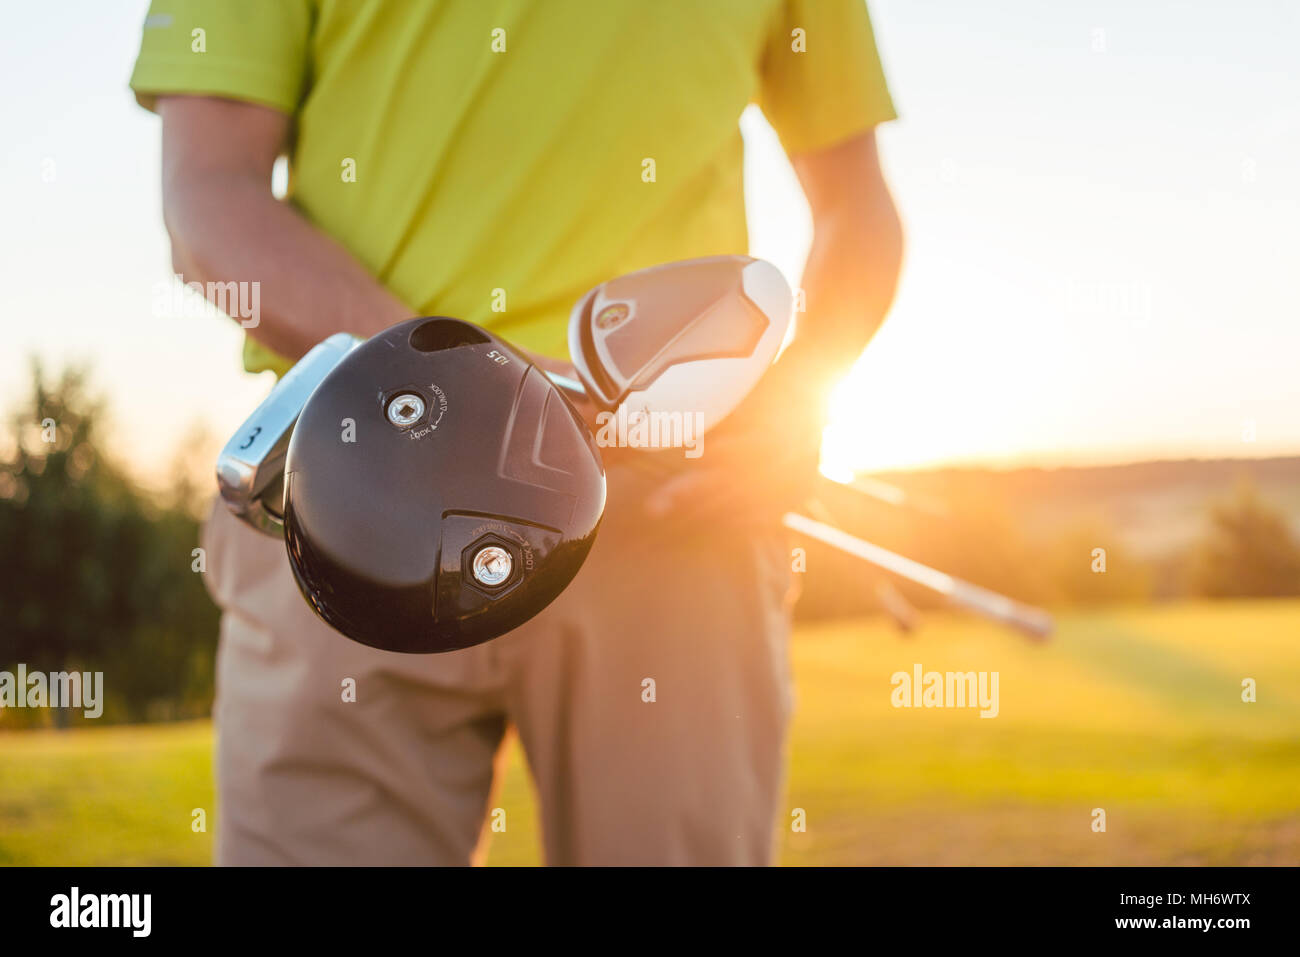 Close-up of the hands of a male professional player holding golf clubs Stock Photo